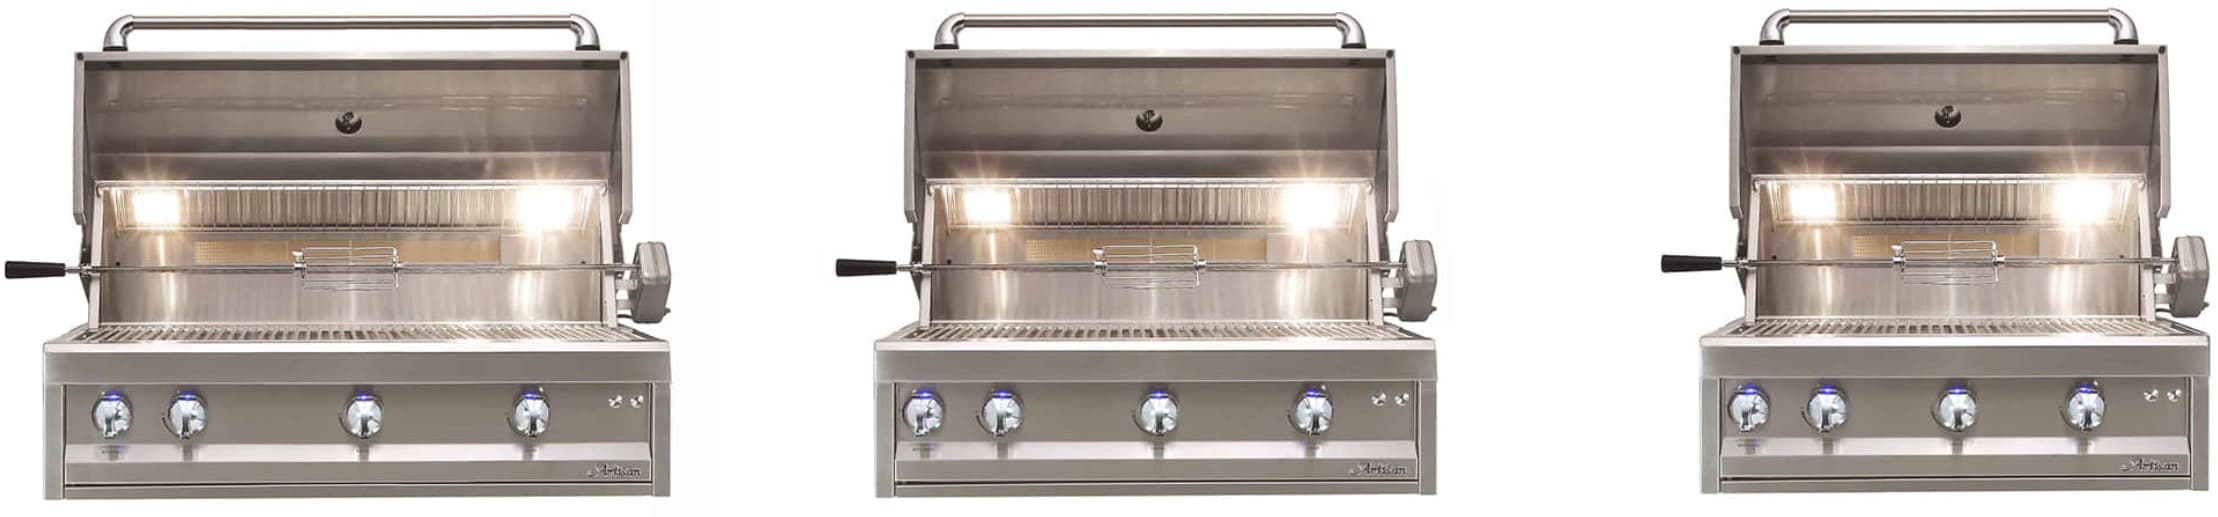 Artisan grills in 3 different sizes